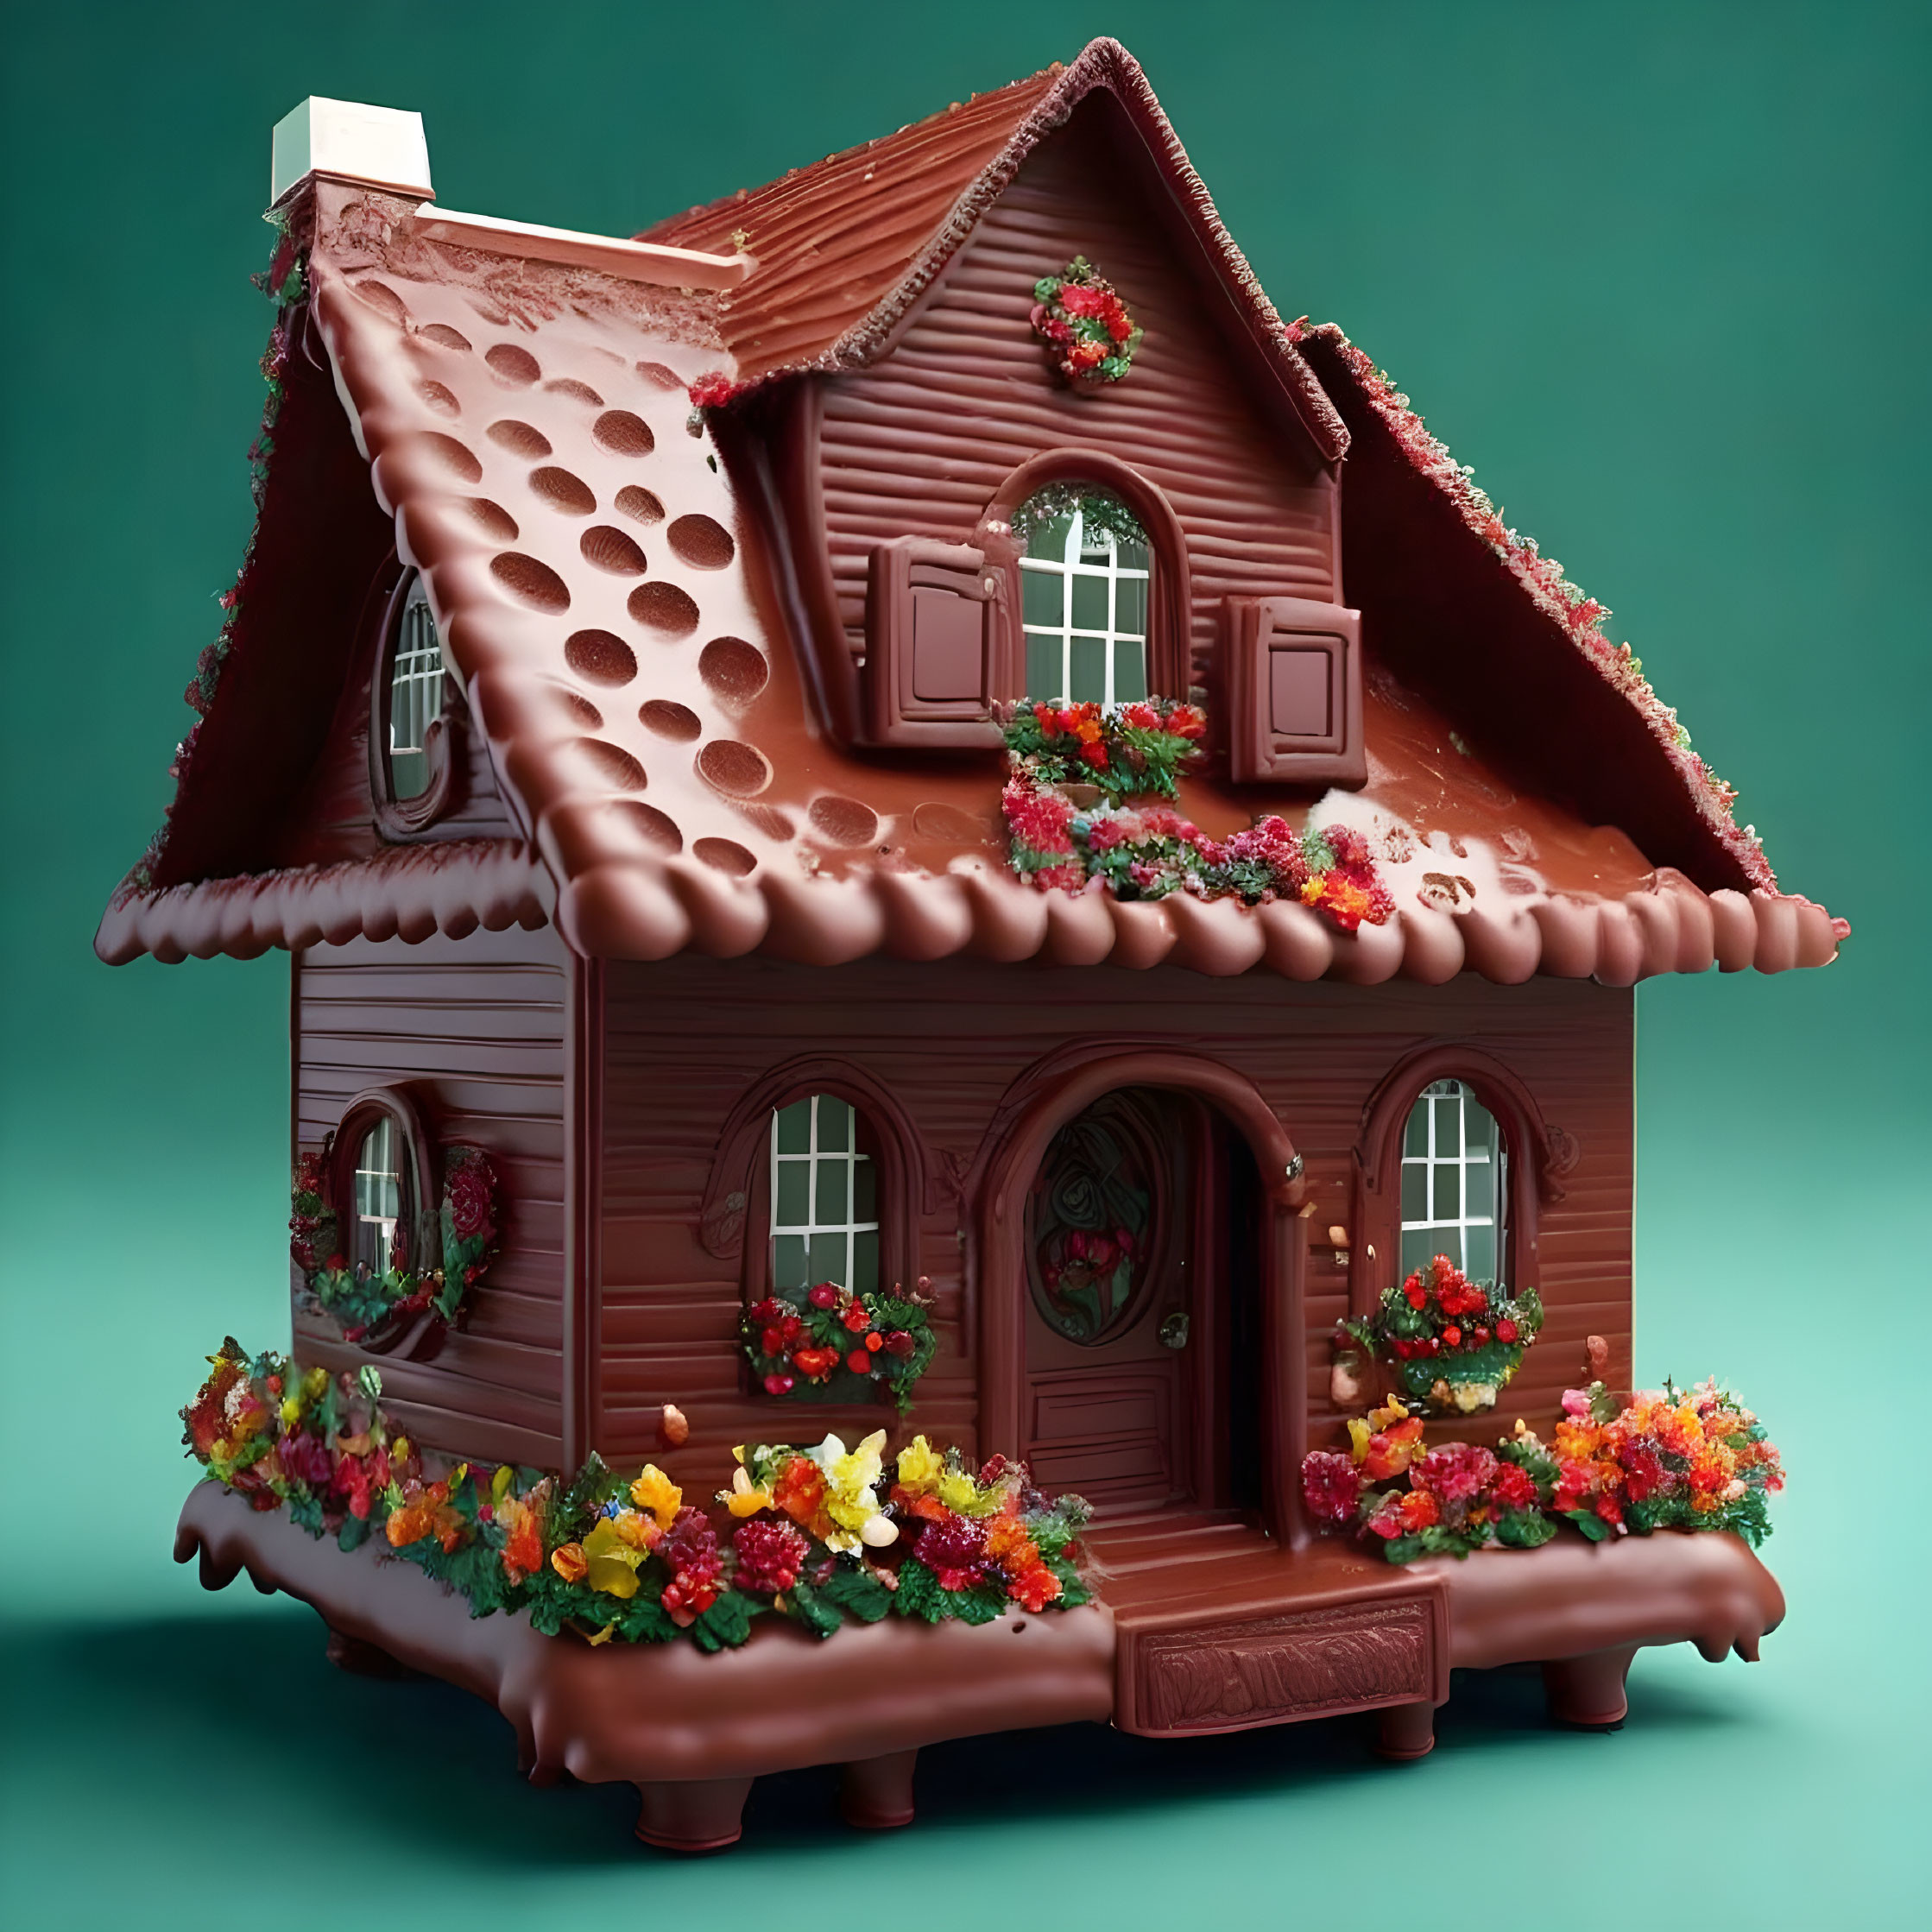 Whimsical chocolate house with shingled roof and flower boxes